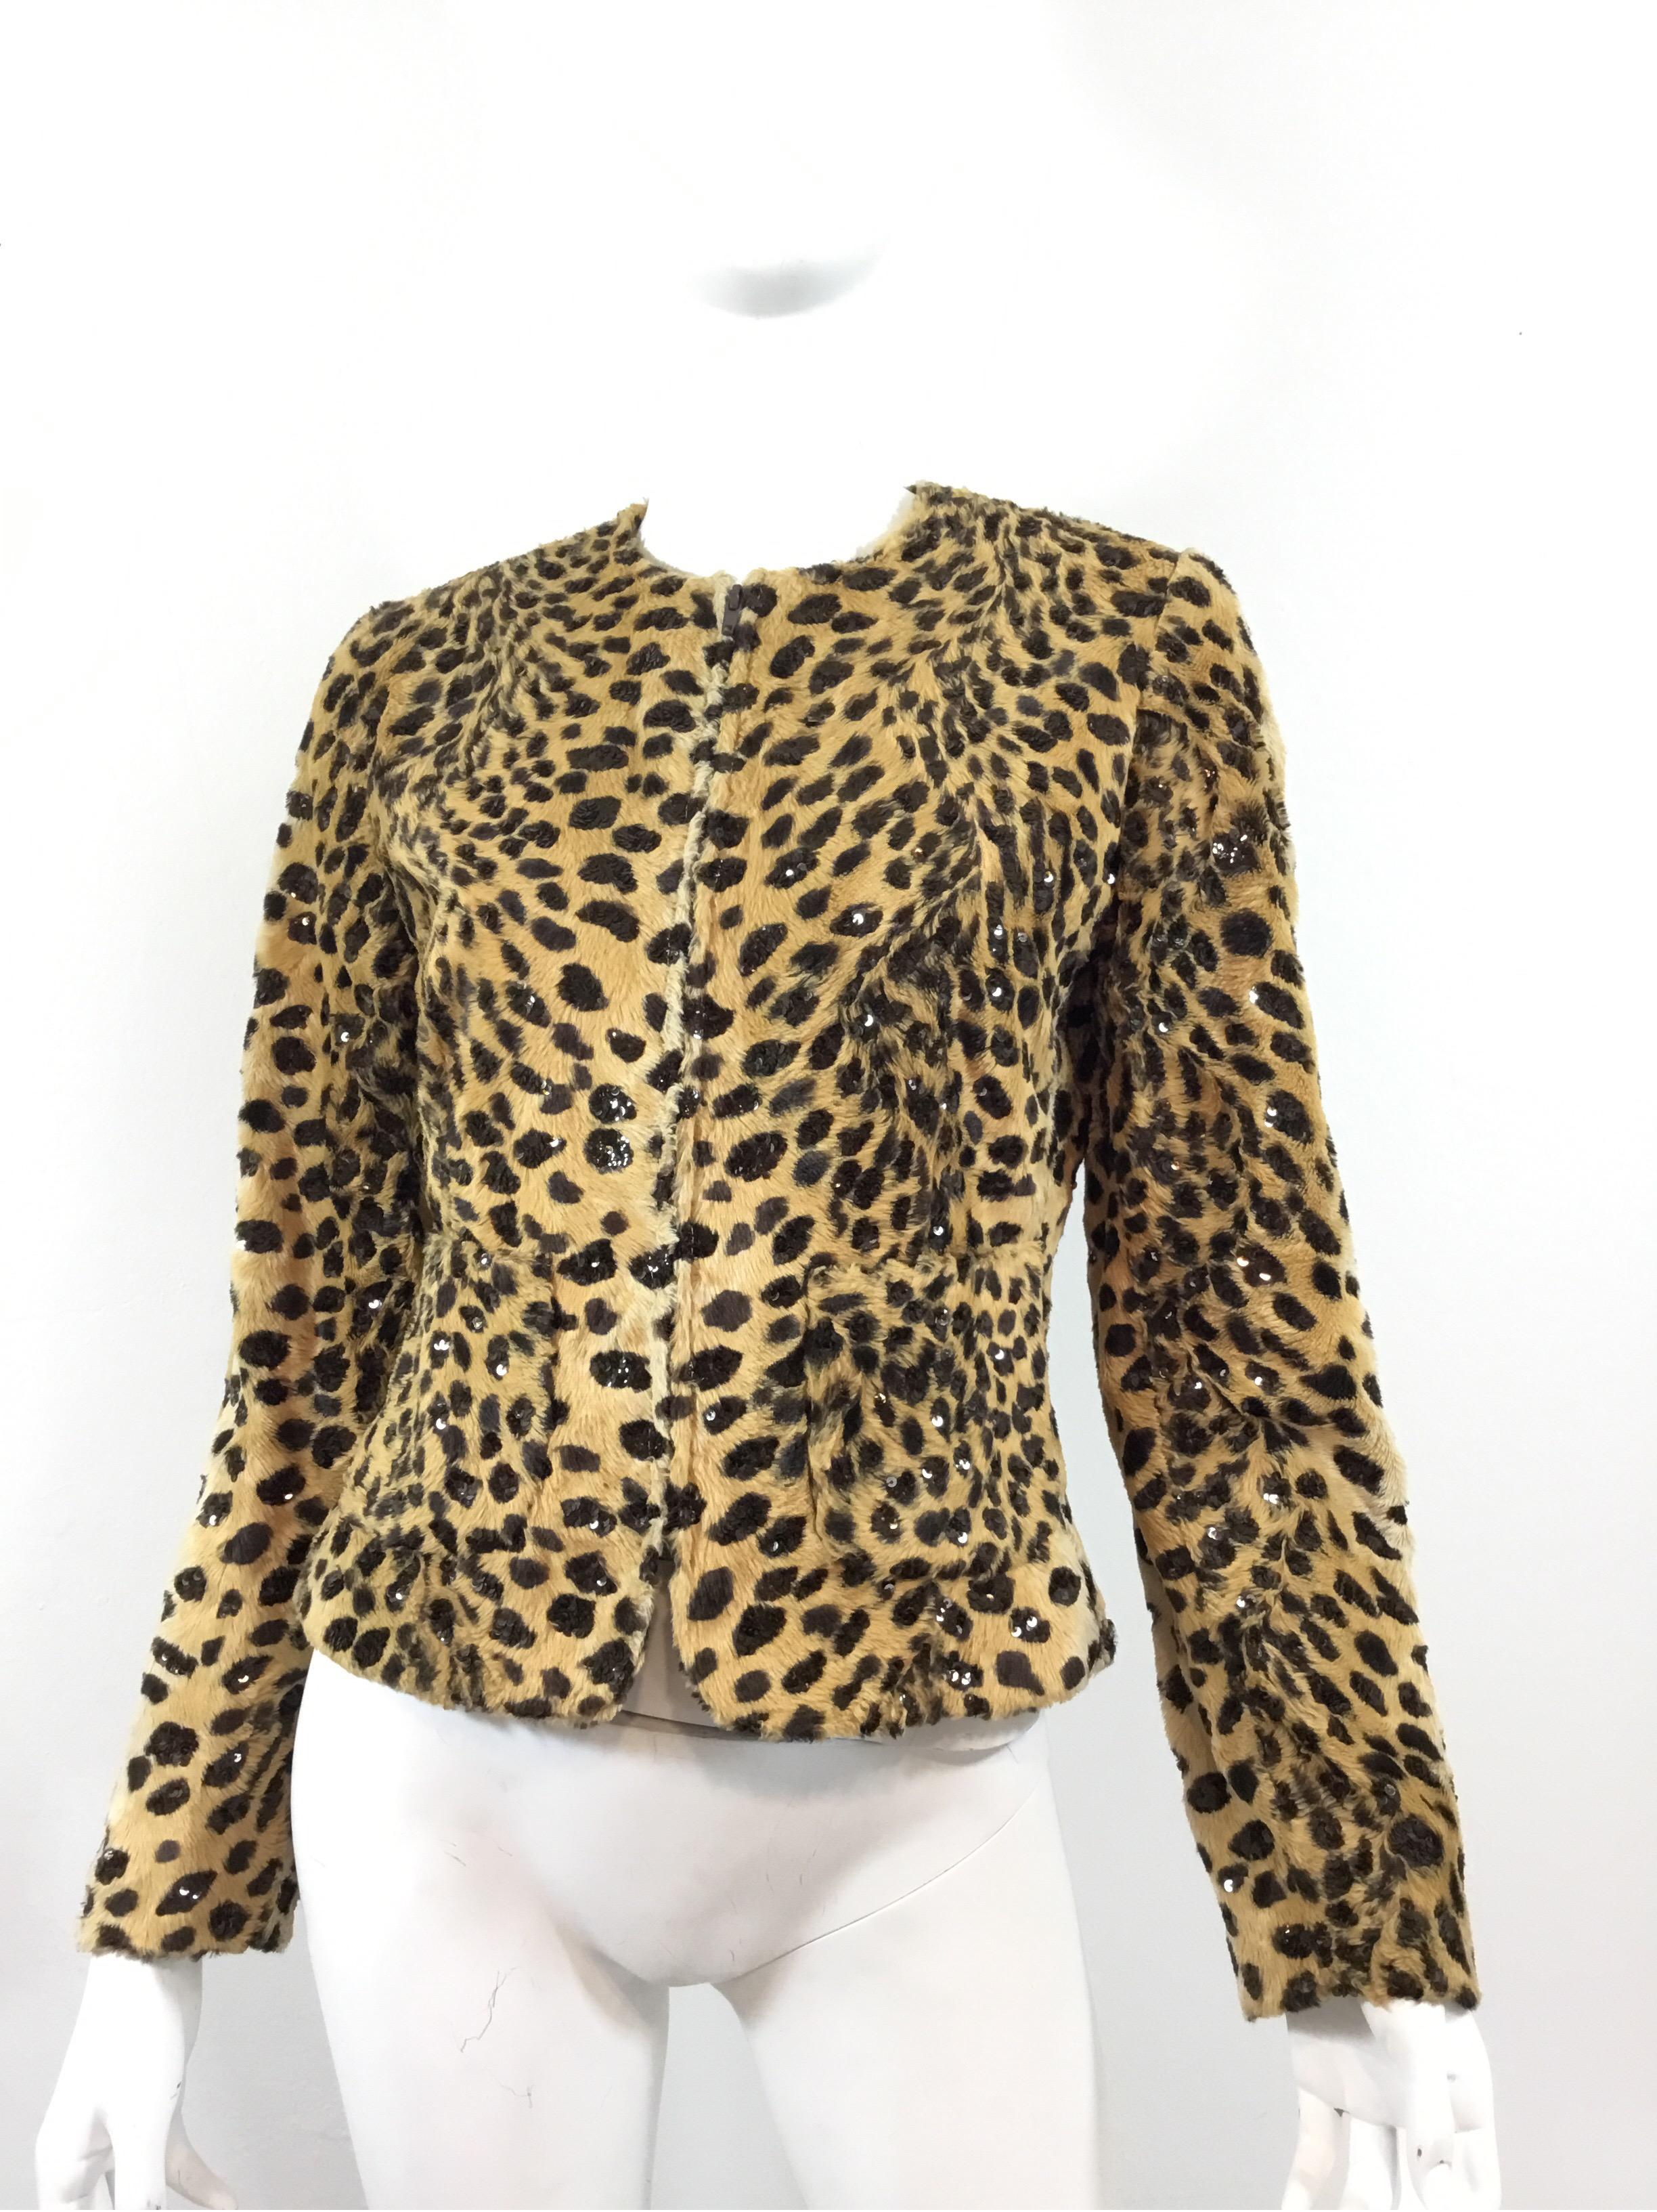 Valentino Miss V jacket features an animal print design throughout adorned with sequins, two slip pockets, front zipper fastening and a full lining. Jacket is a size 42/8, made in Italy, and is composed of: 62% cotton, 38% rayon and lining 65%